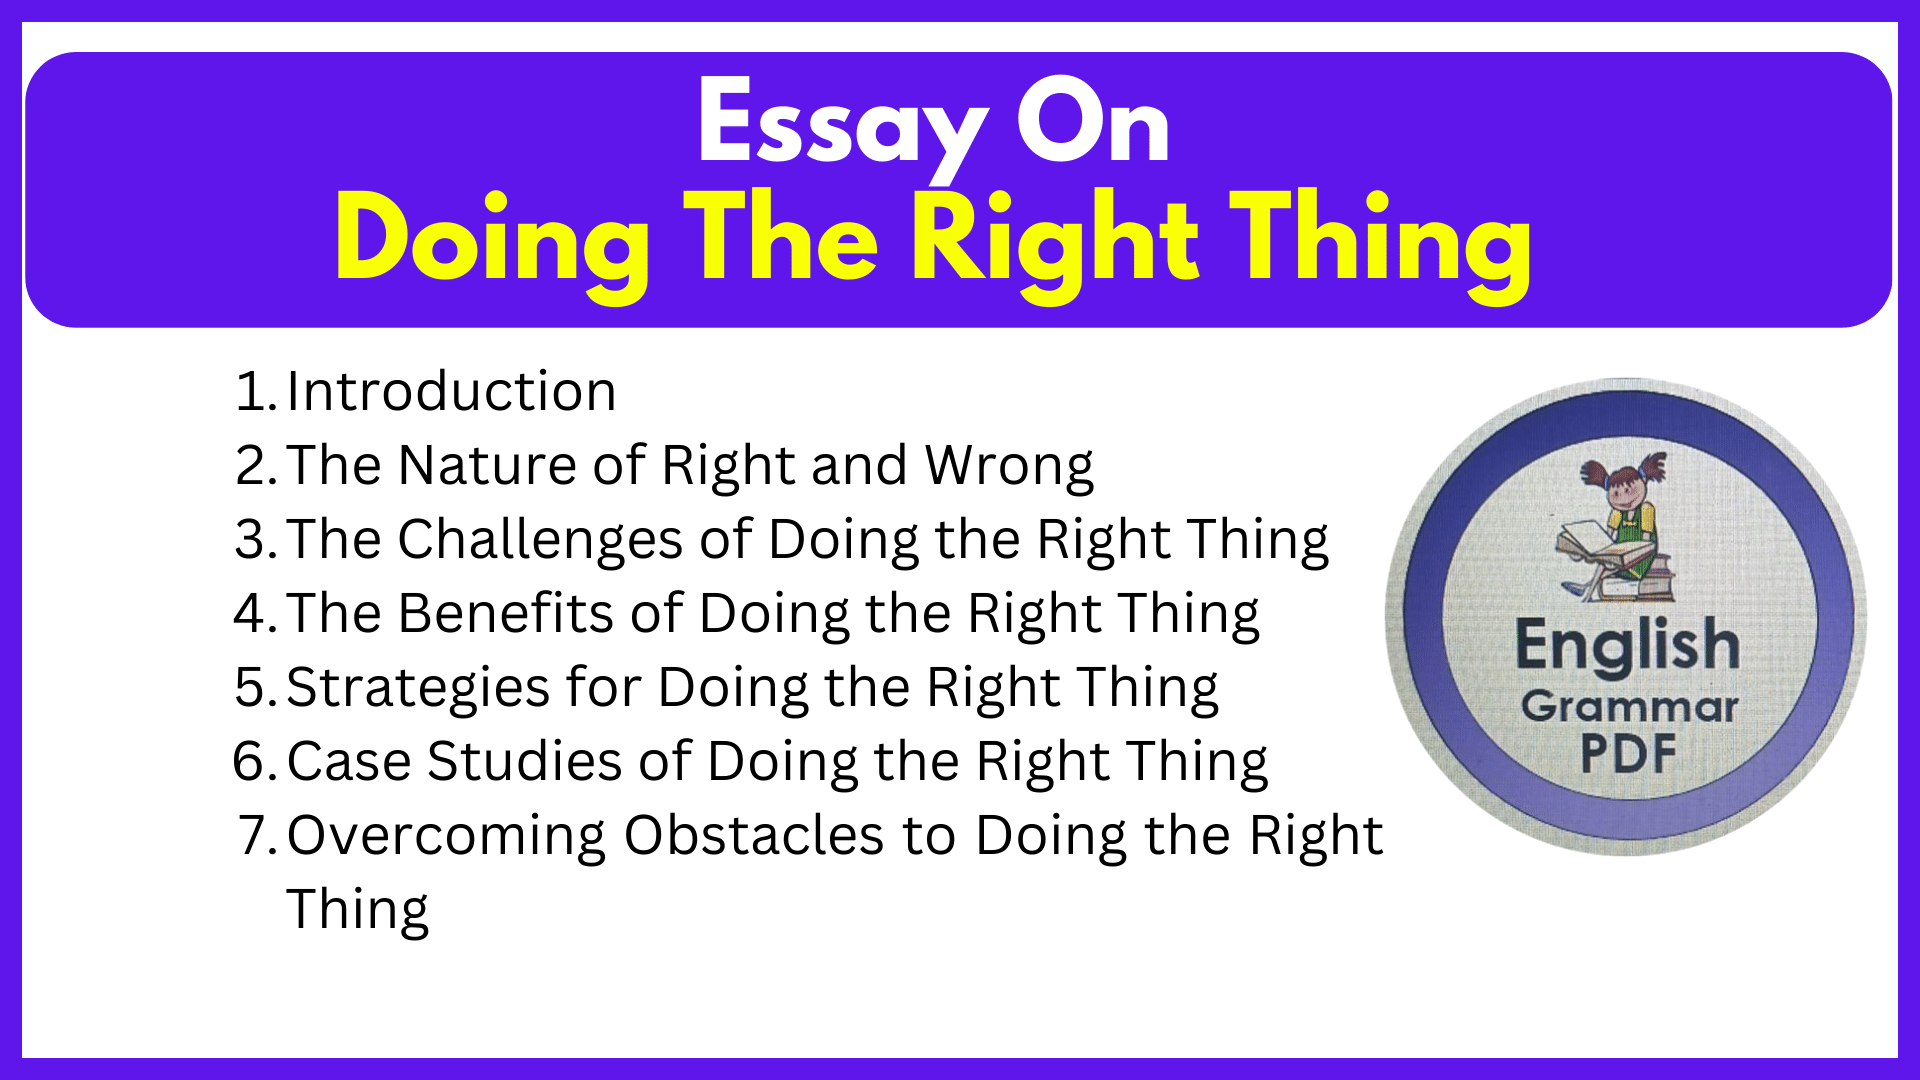 Essay On Doing The Right Thing